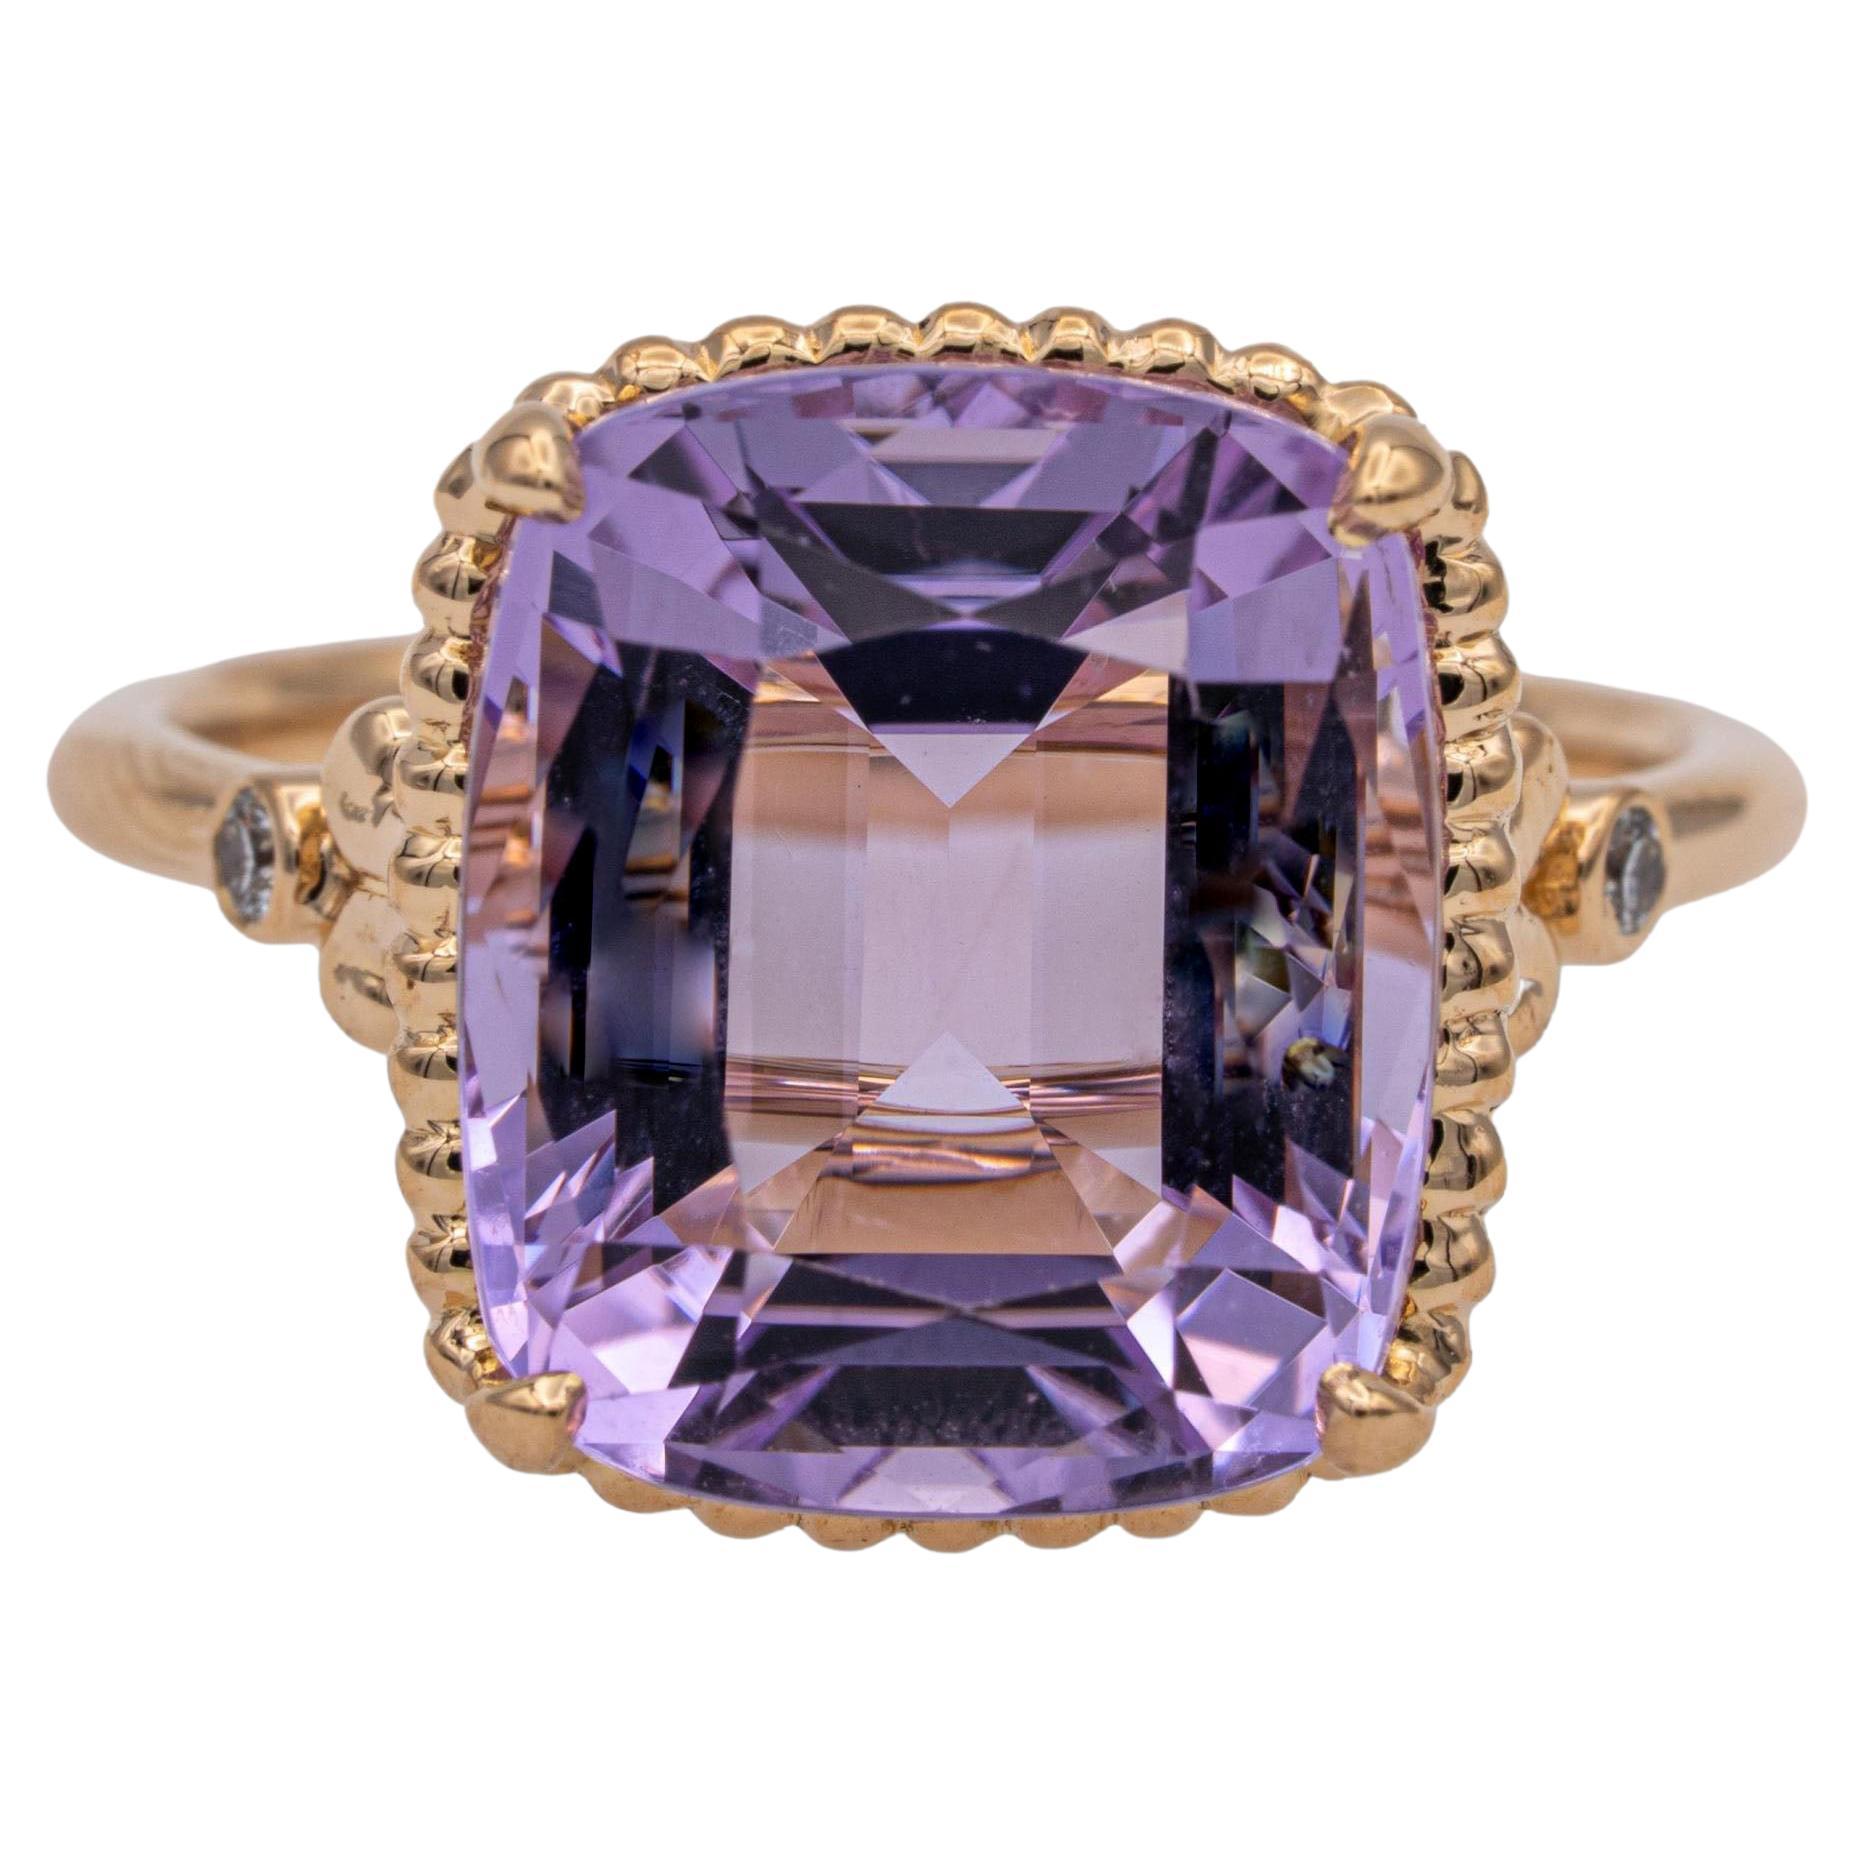 Tiffany & Co. Amethyst and Diamond Sparklers Cocktail Ring in 18K Rose Gold